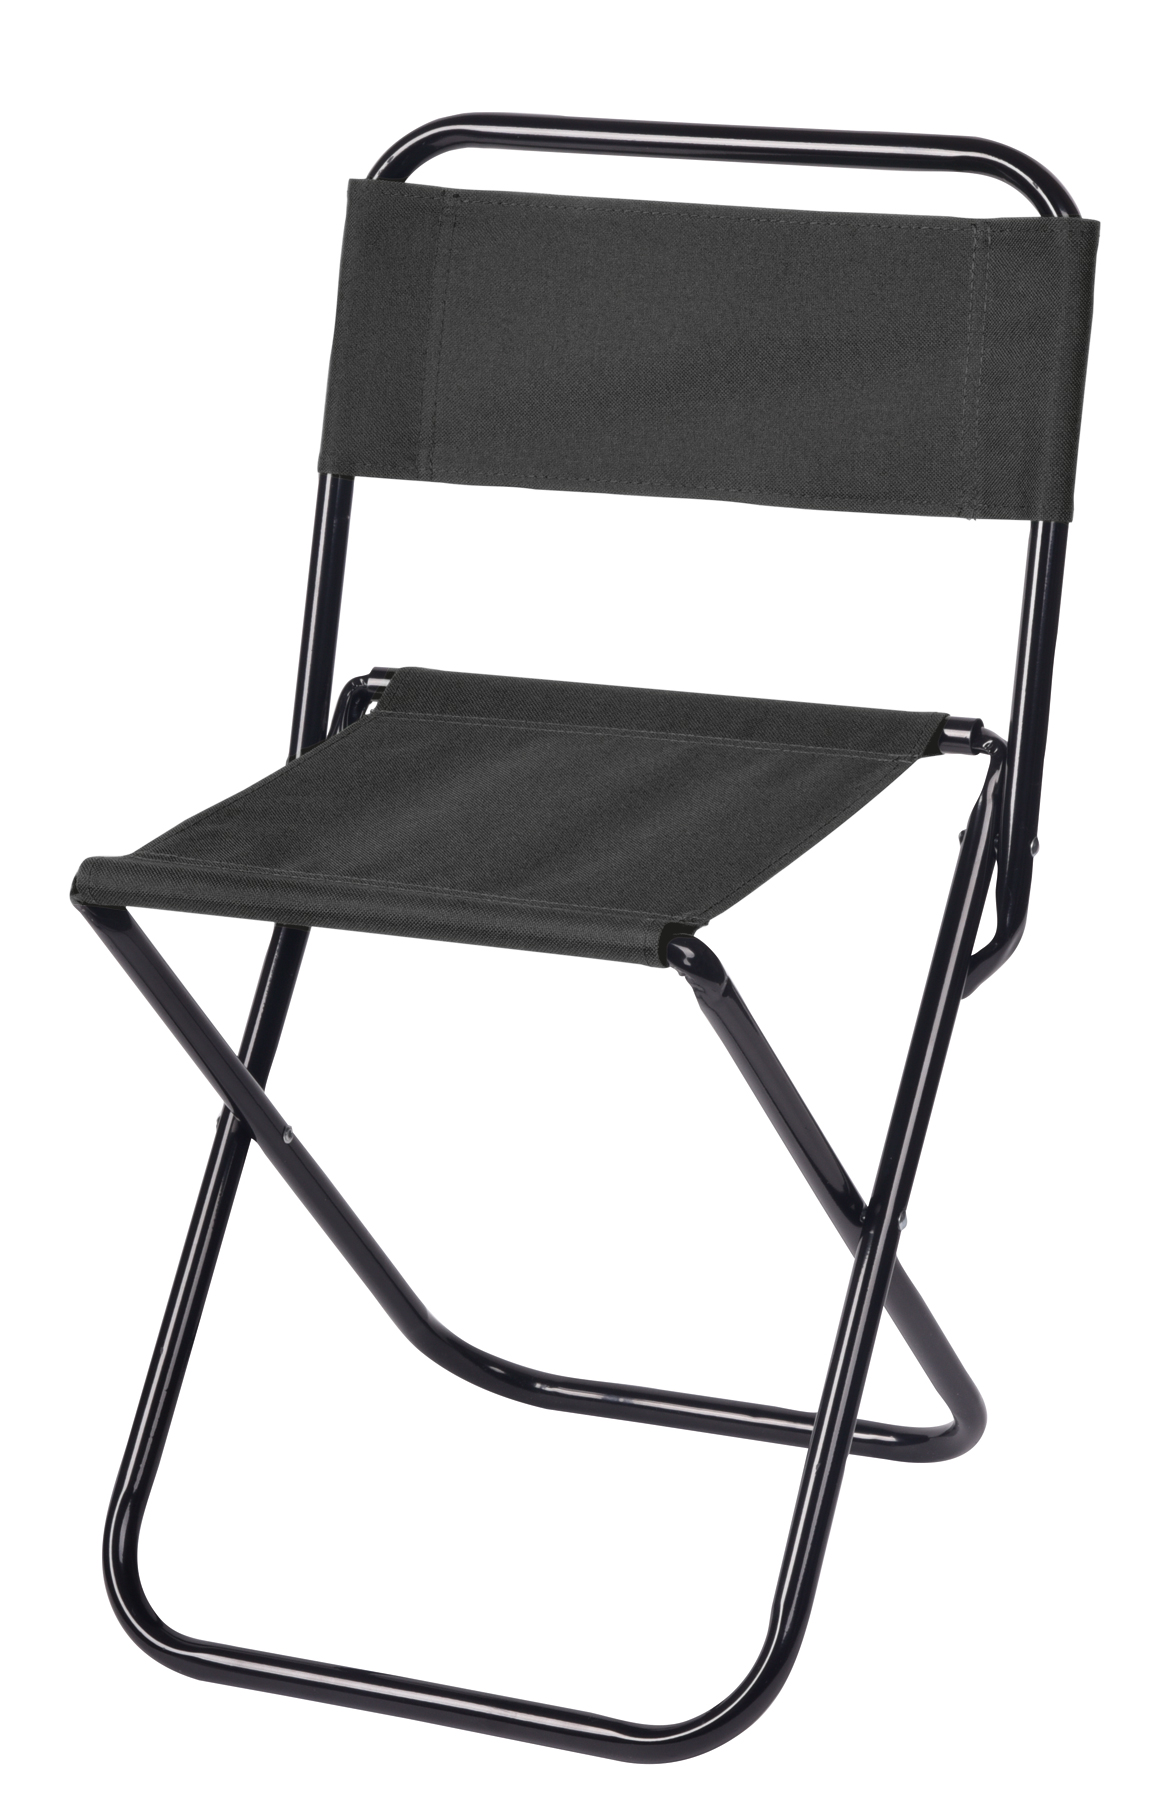 Folding camping chair TAKEOUT - black